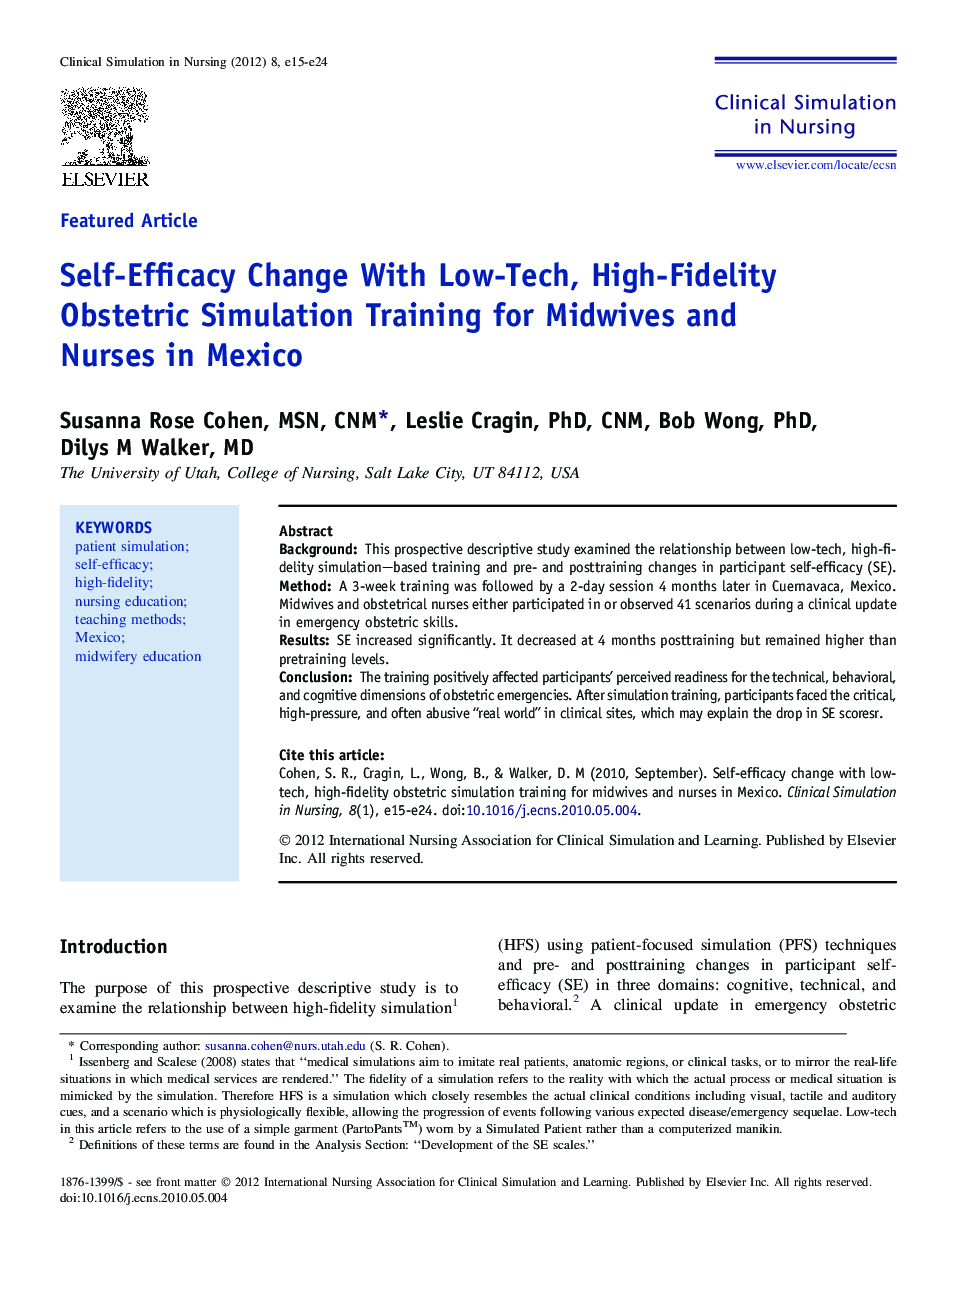 Self-Efficacy Change With Low-Tech, High-Fidelity Obstetric Simulation Training for Midwives and Nurses in Mexico